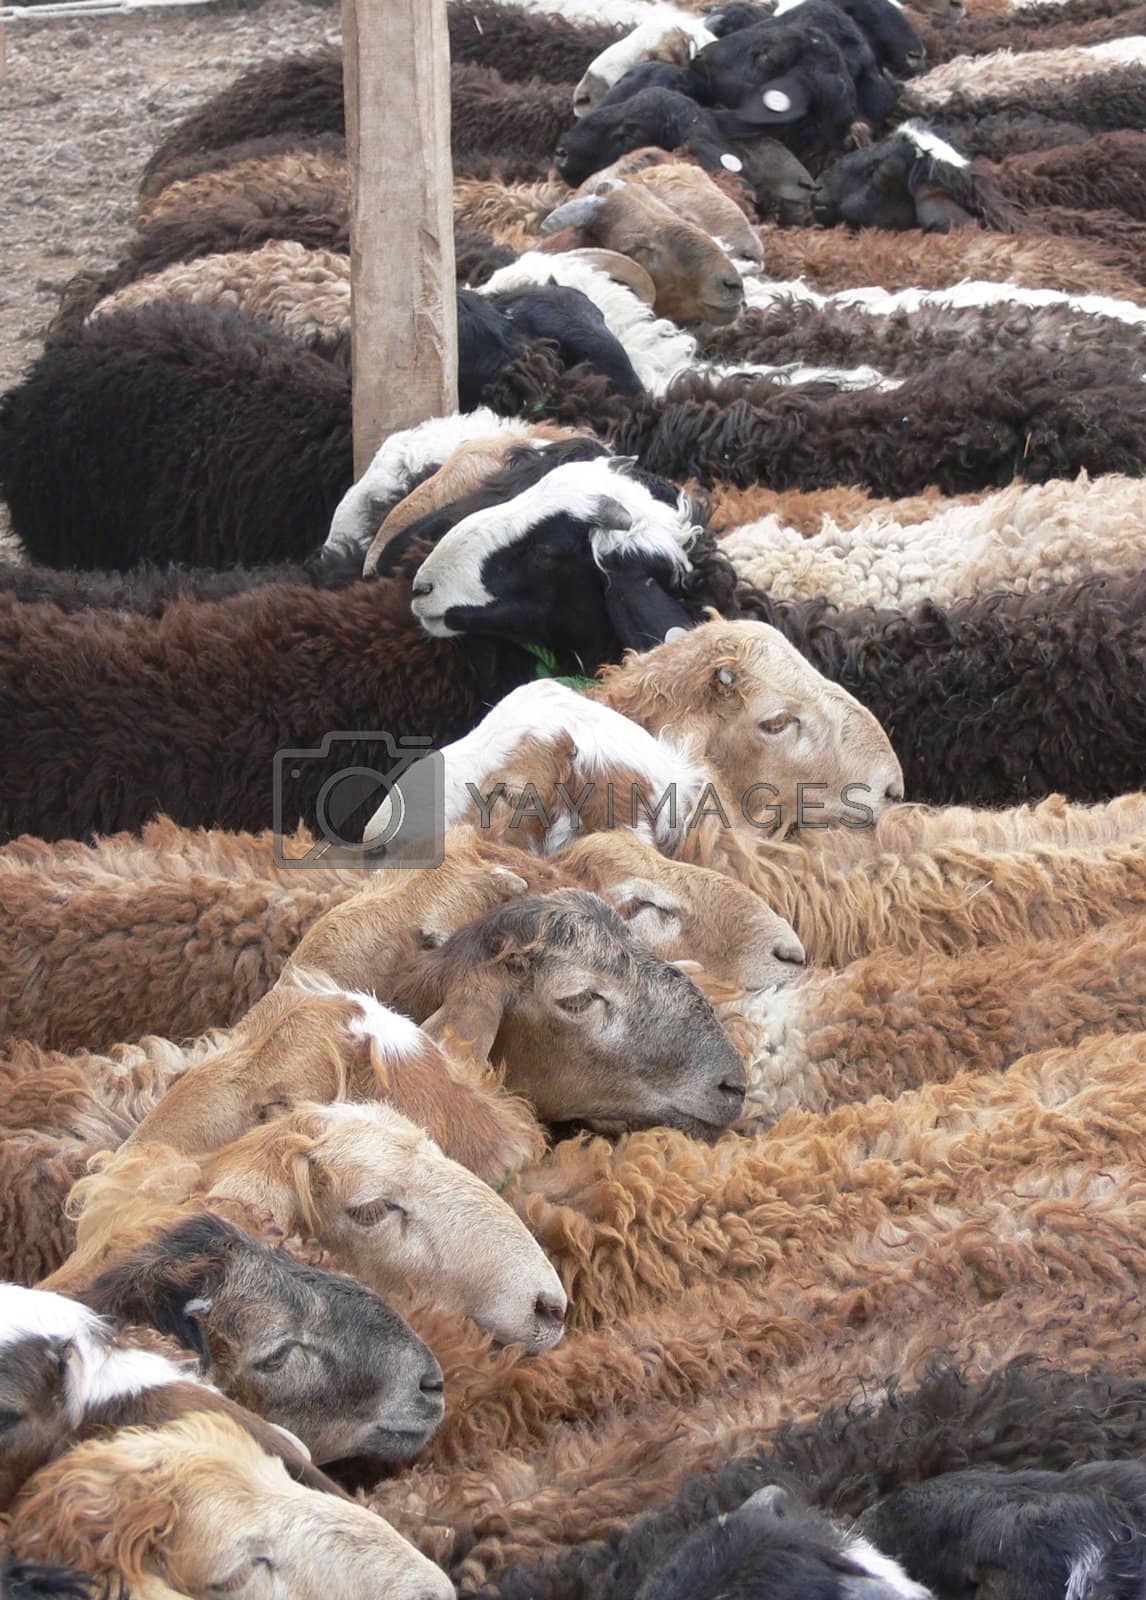 Royalty free image of Sheep For Sale by openyouraperture